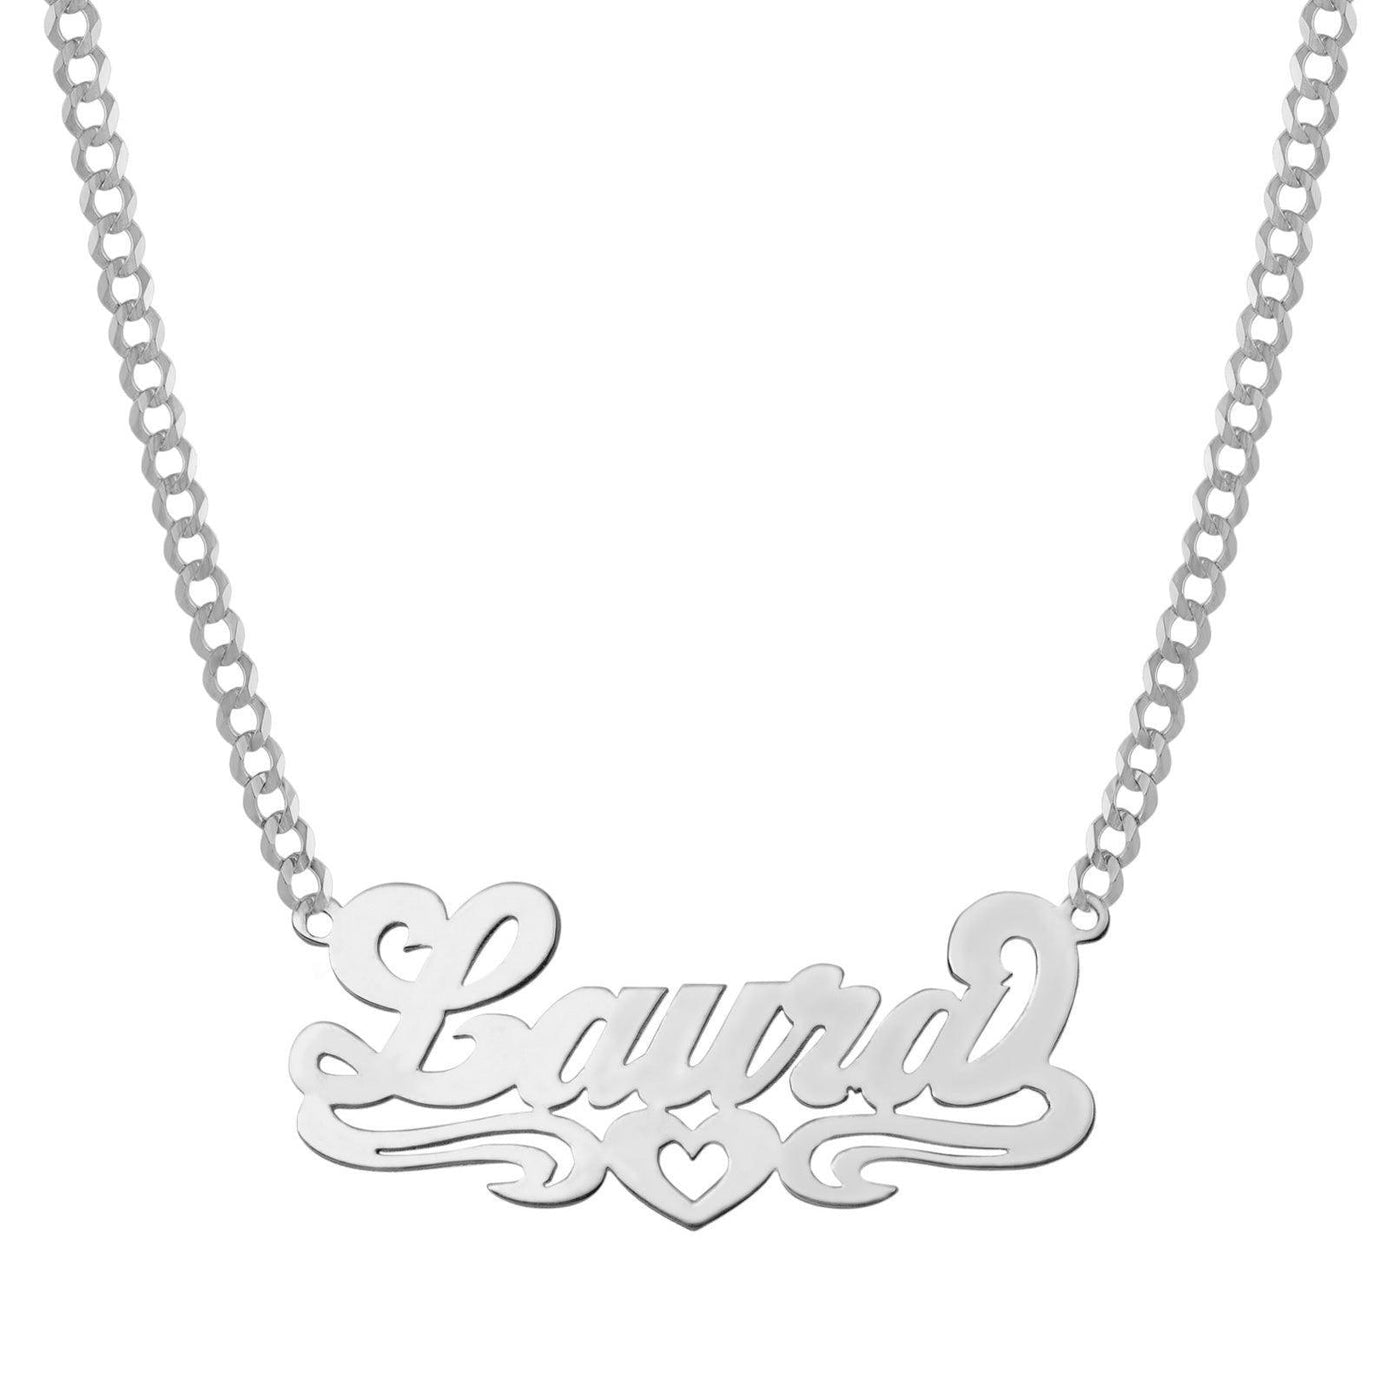 Ladies Script Name Plate Necklace 14K White Gold - Style 123 - bayamjewelry